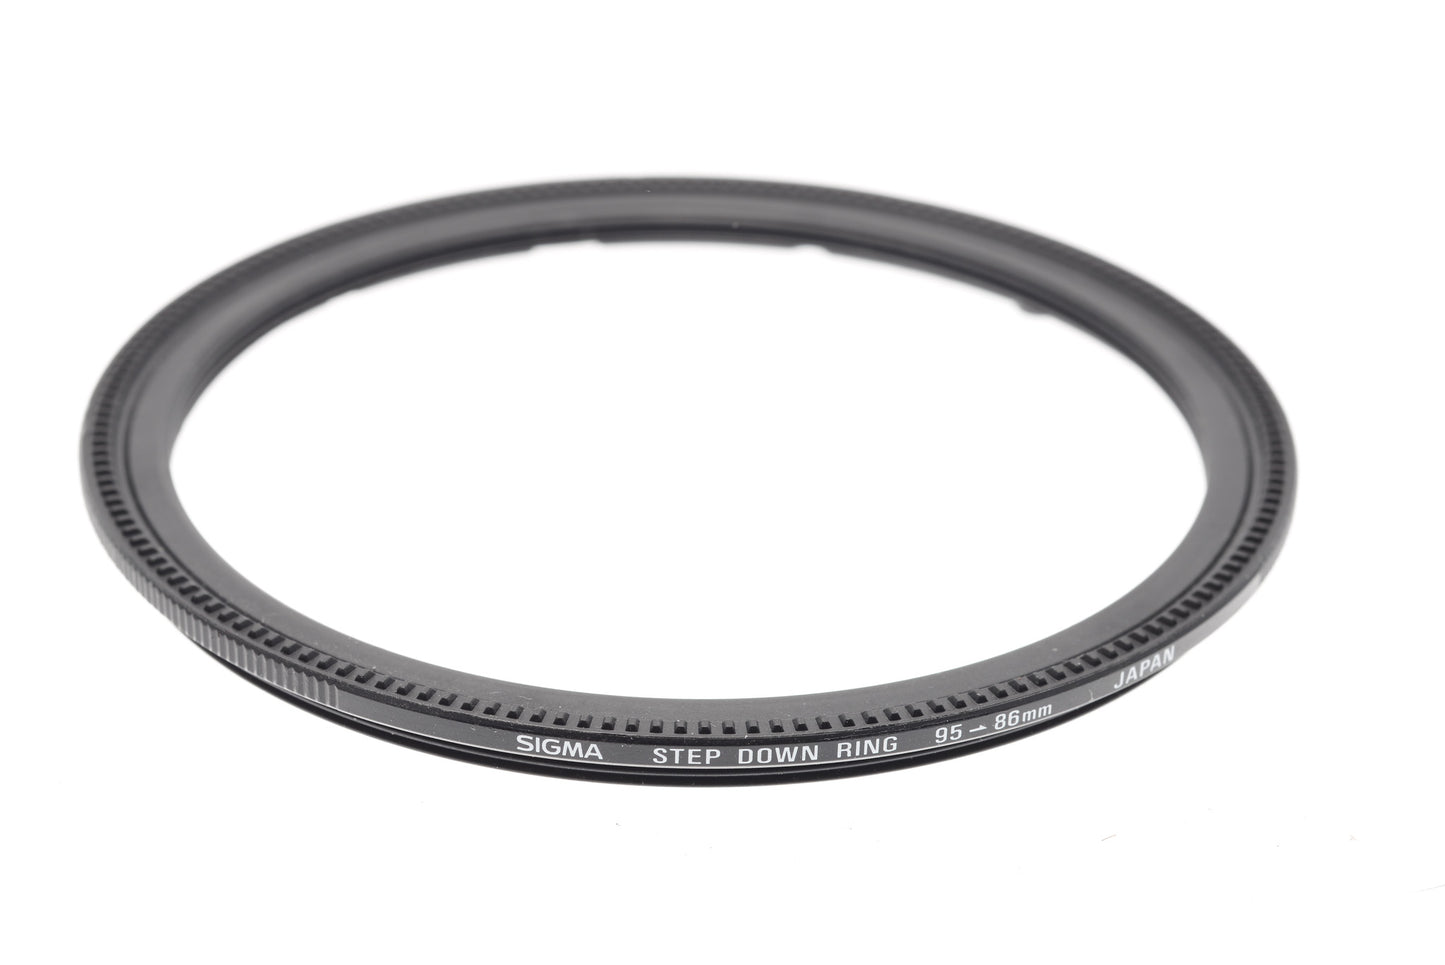 Sigma Step Down Ring 95-86mm - Accessory